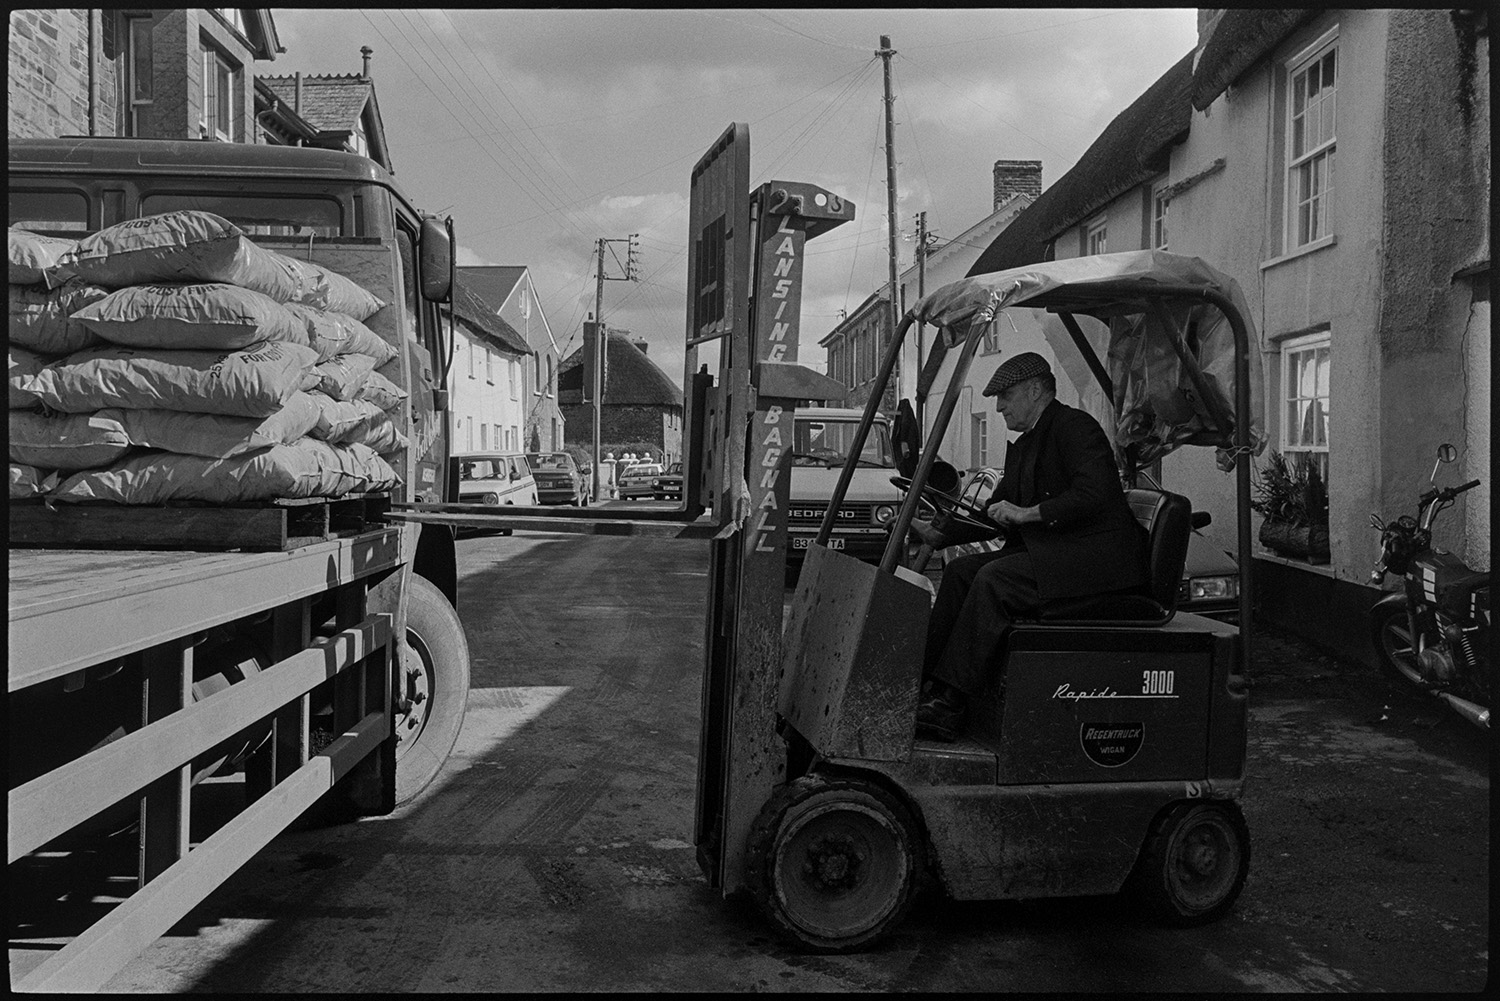 Men unloading fertiliser with fork lift truck.
[Les Shapland using a fork lift truck to unload a pallet with bags of fuel from a lorry parked on East Street, Chulmleigh. There are parked cars and town houses in the background.]